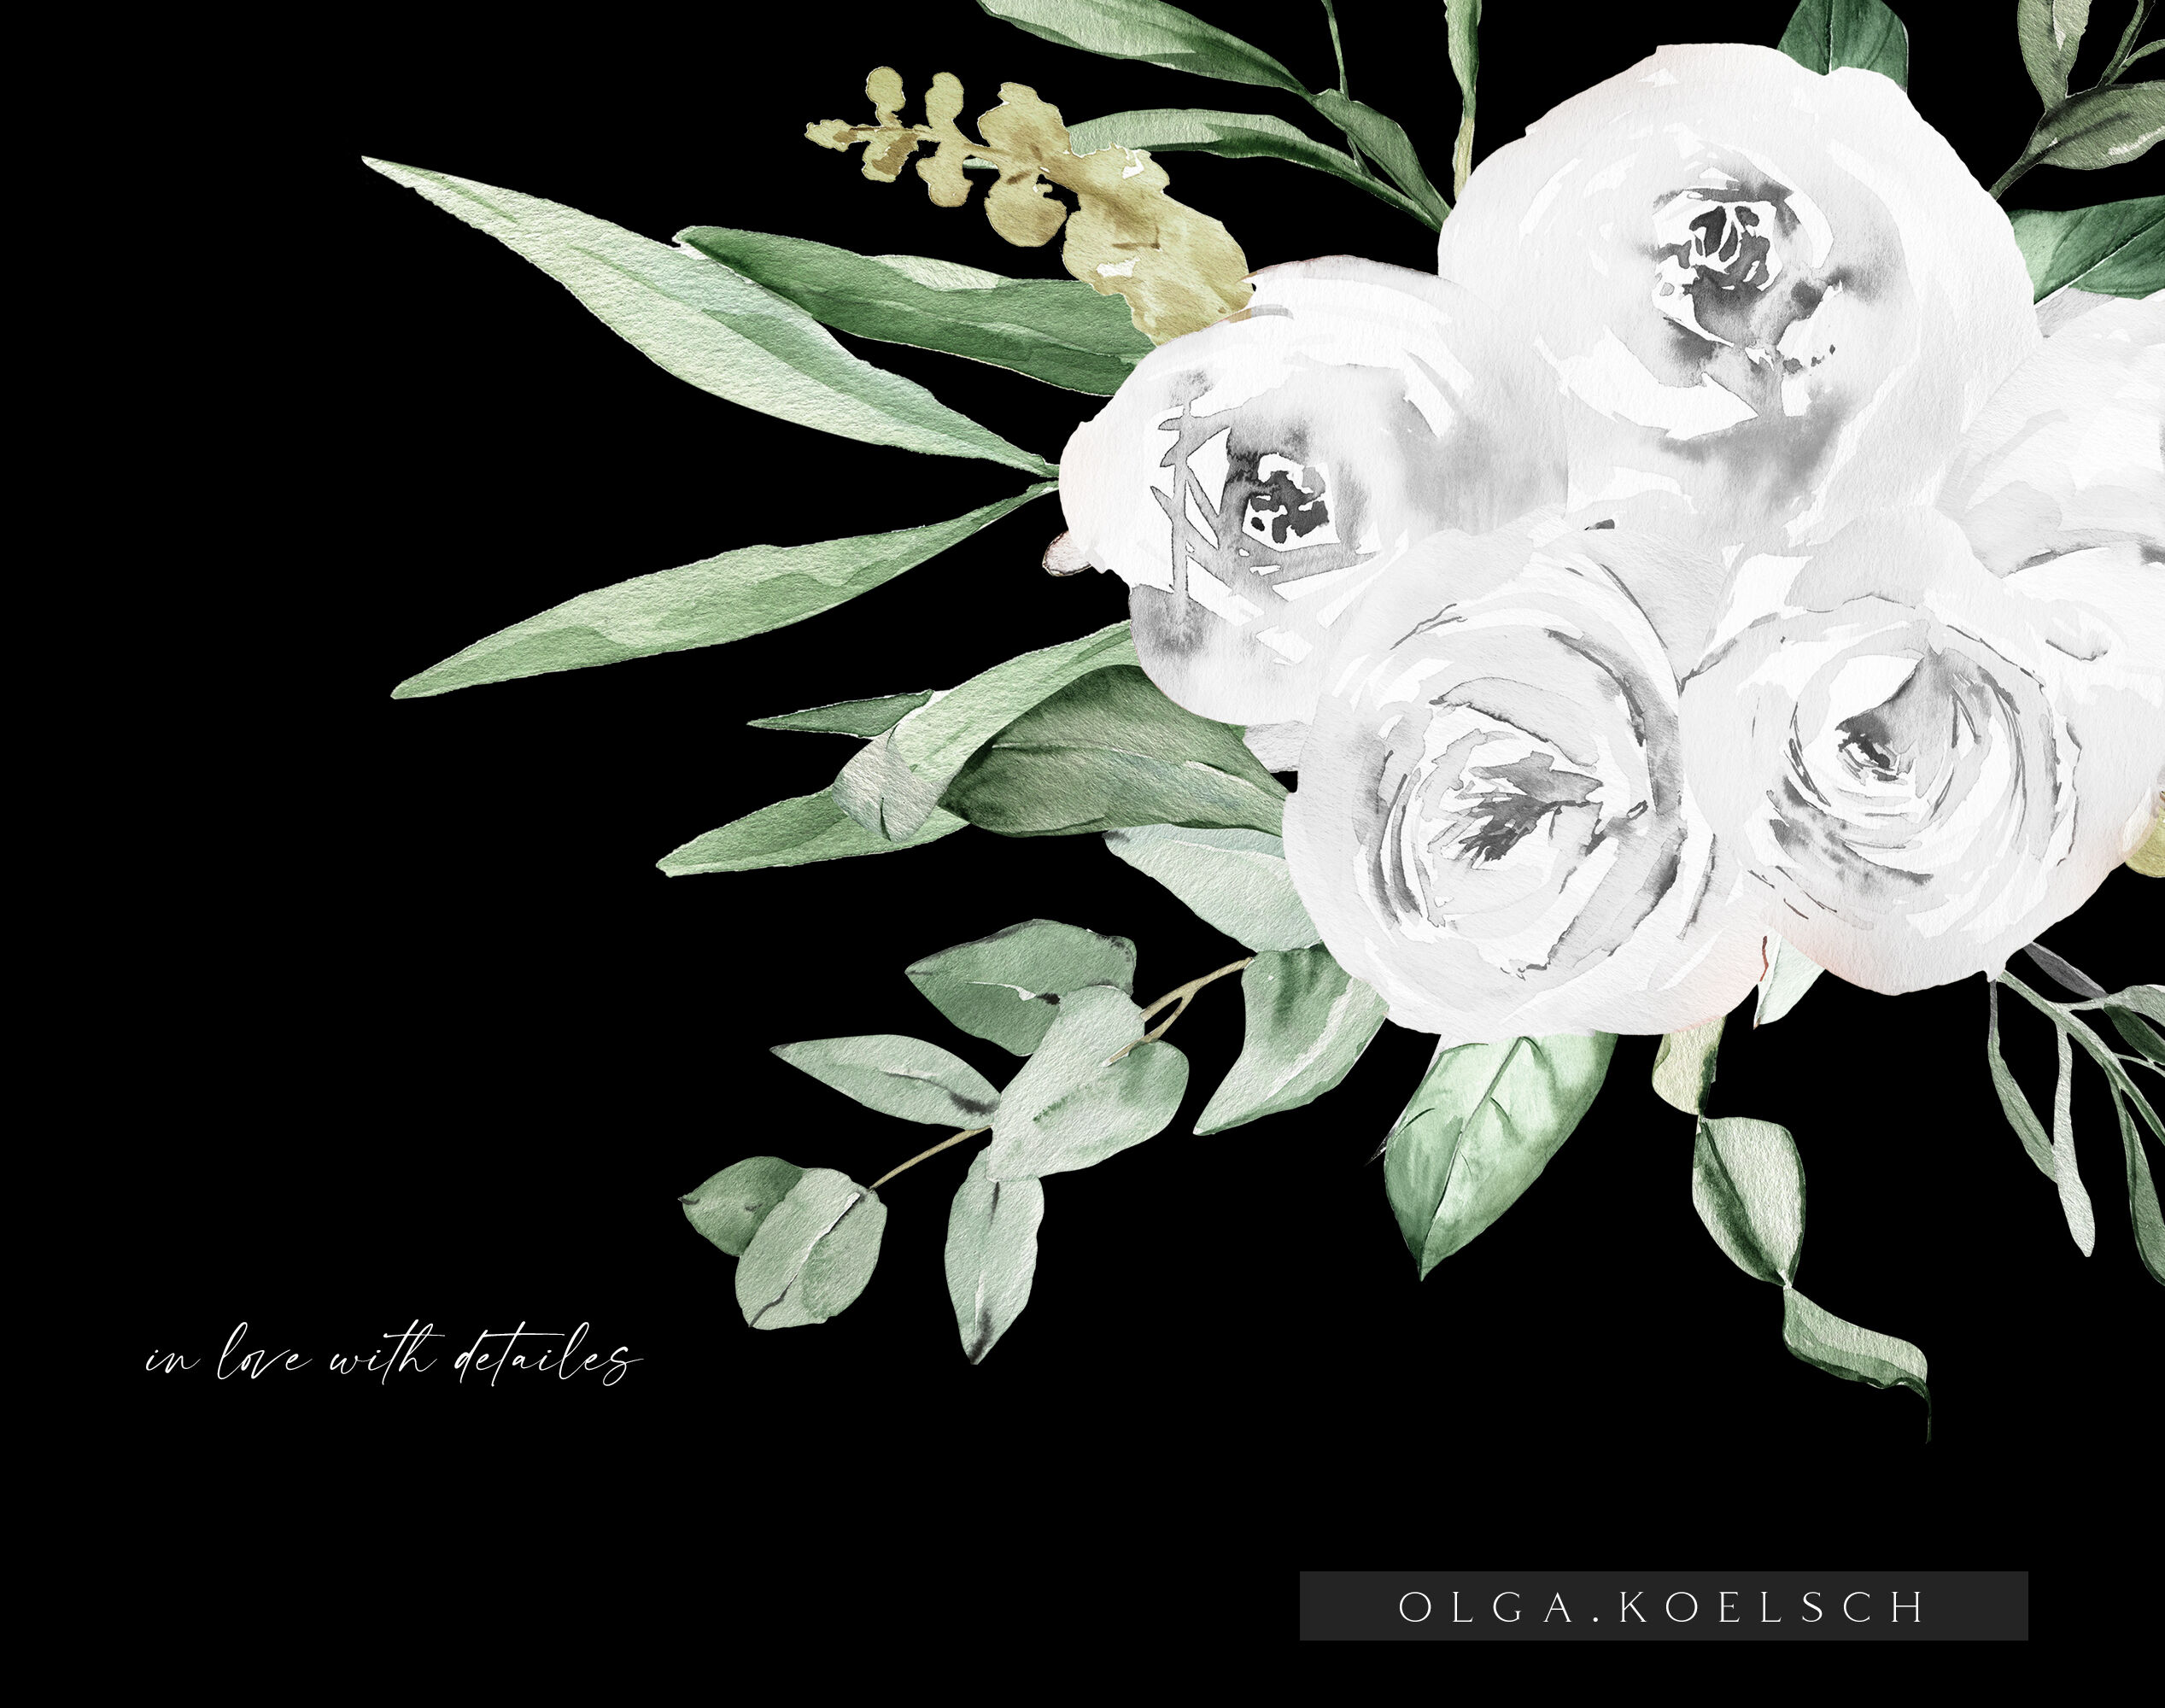 white flowers bouquet png